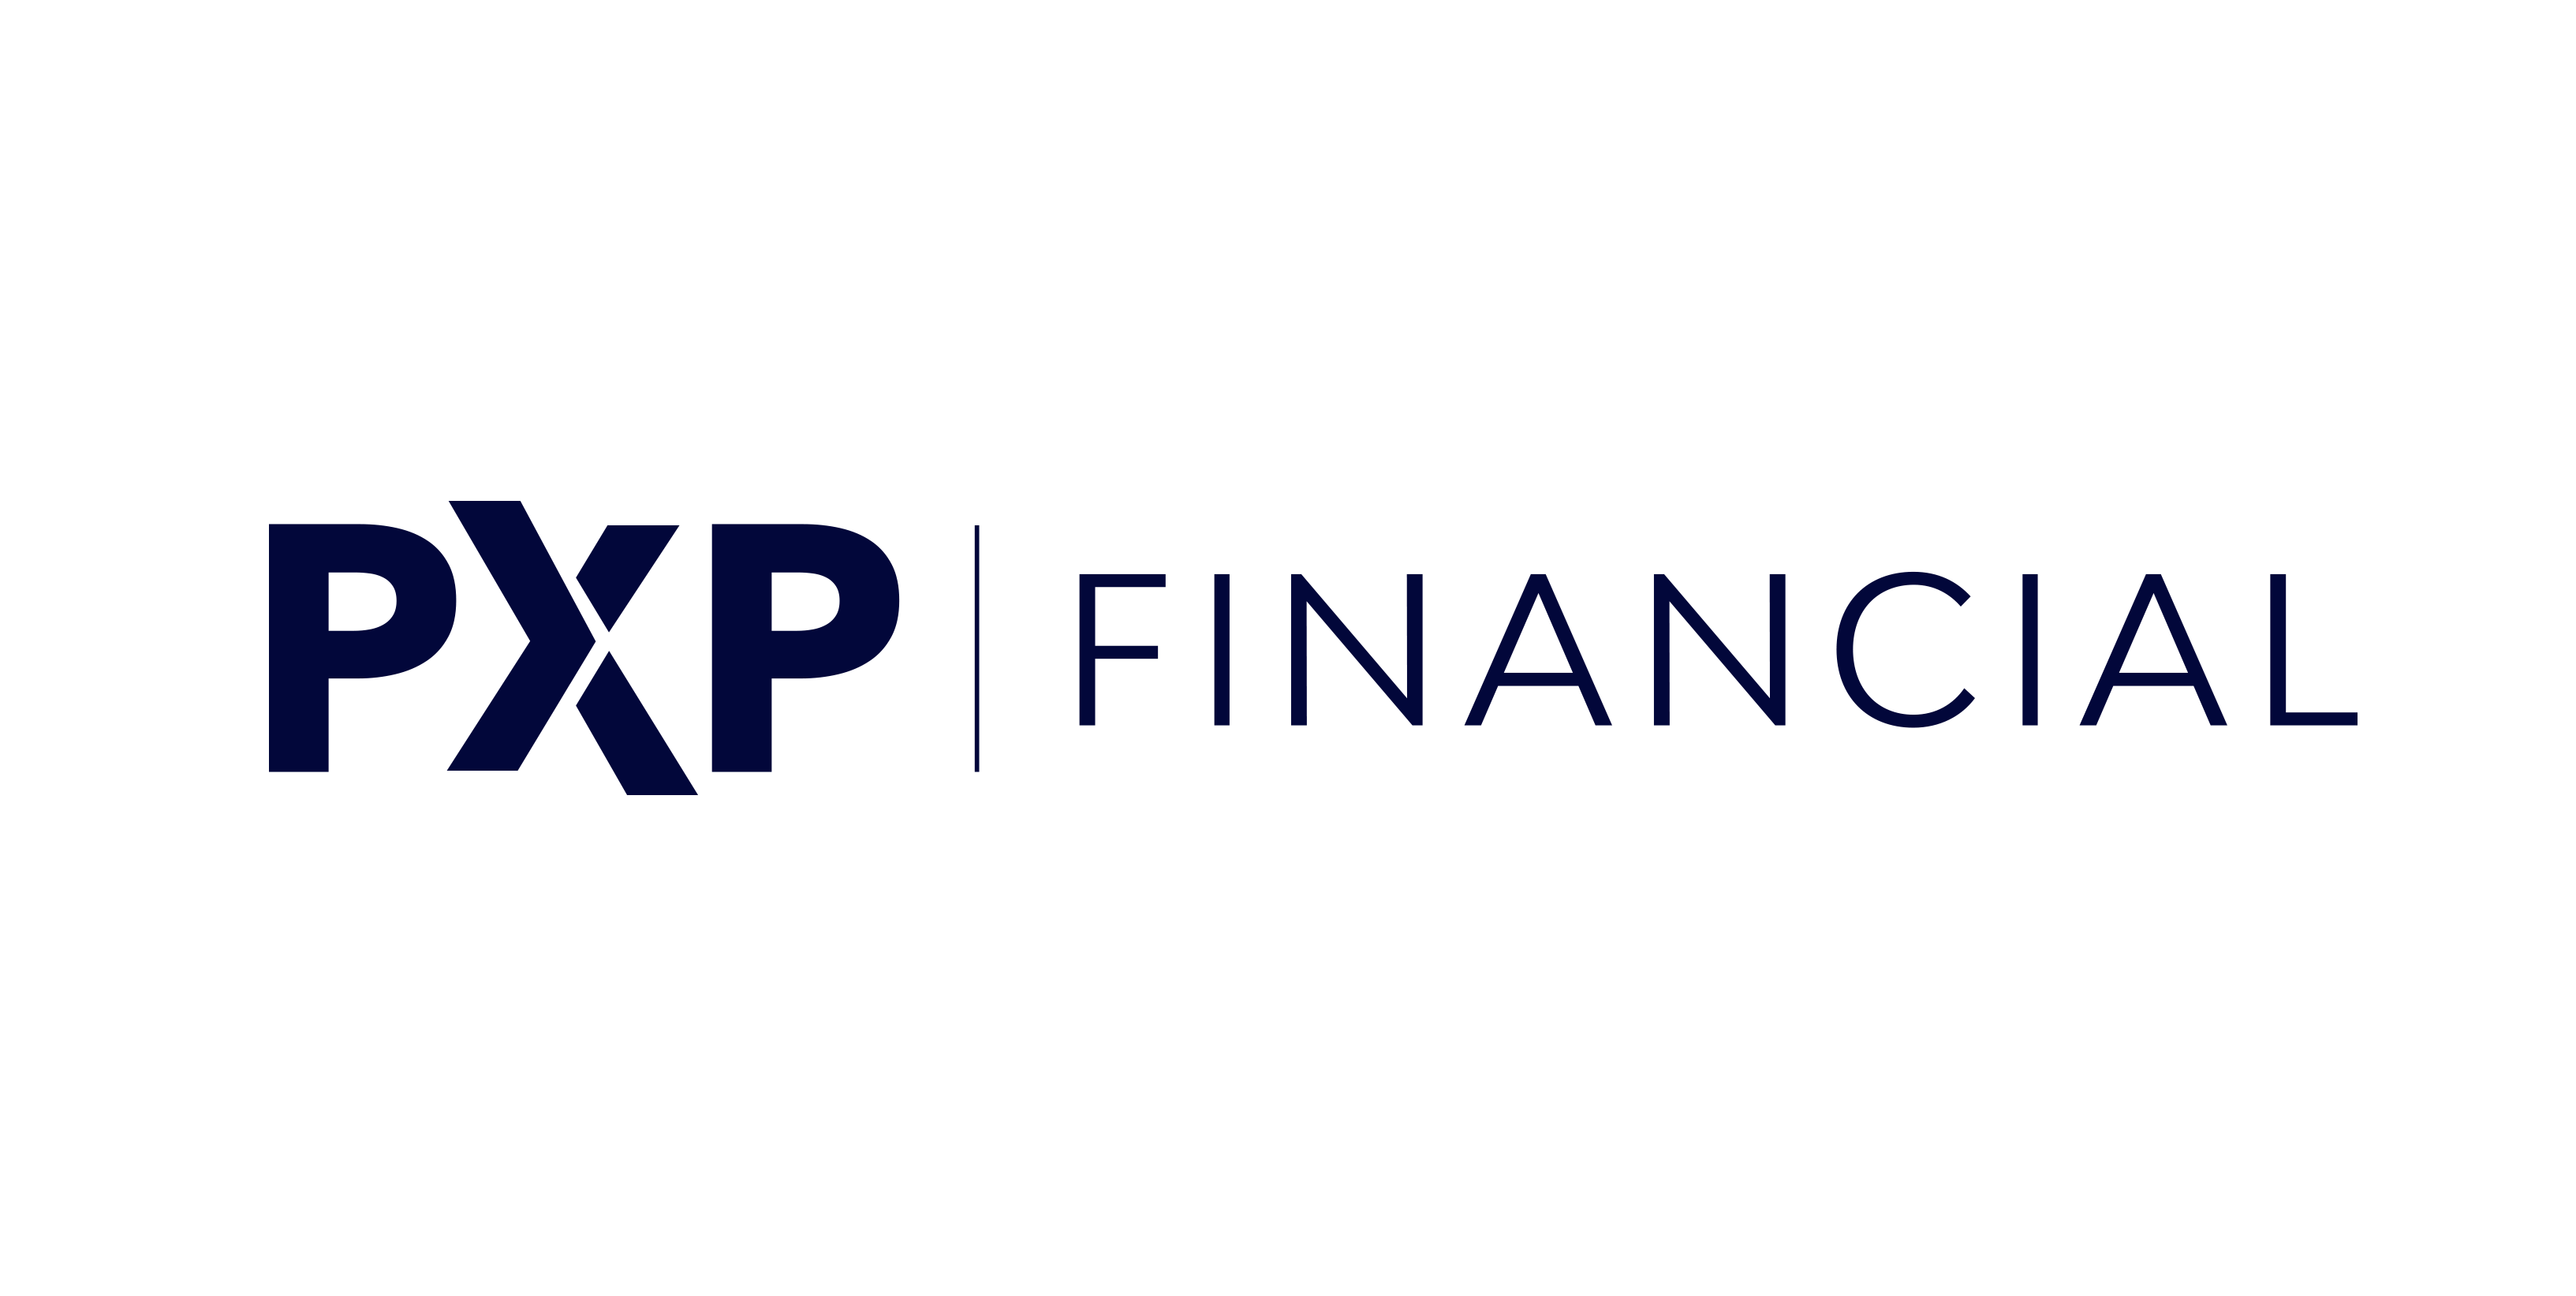 Expansion Continues for PXP Financial with Canada Launch